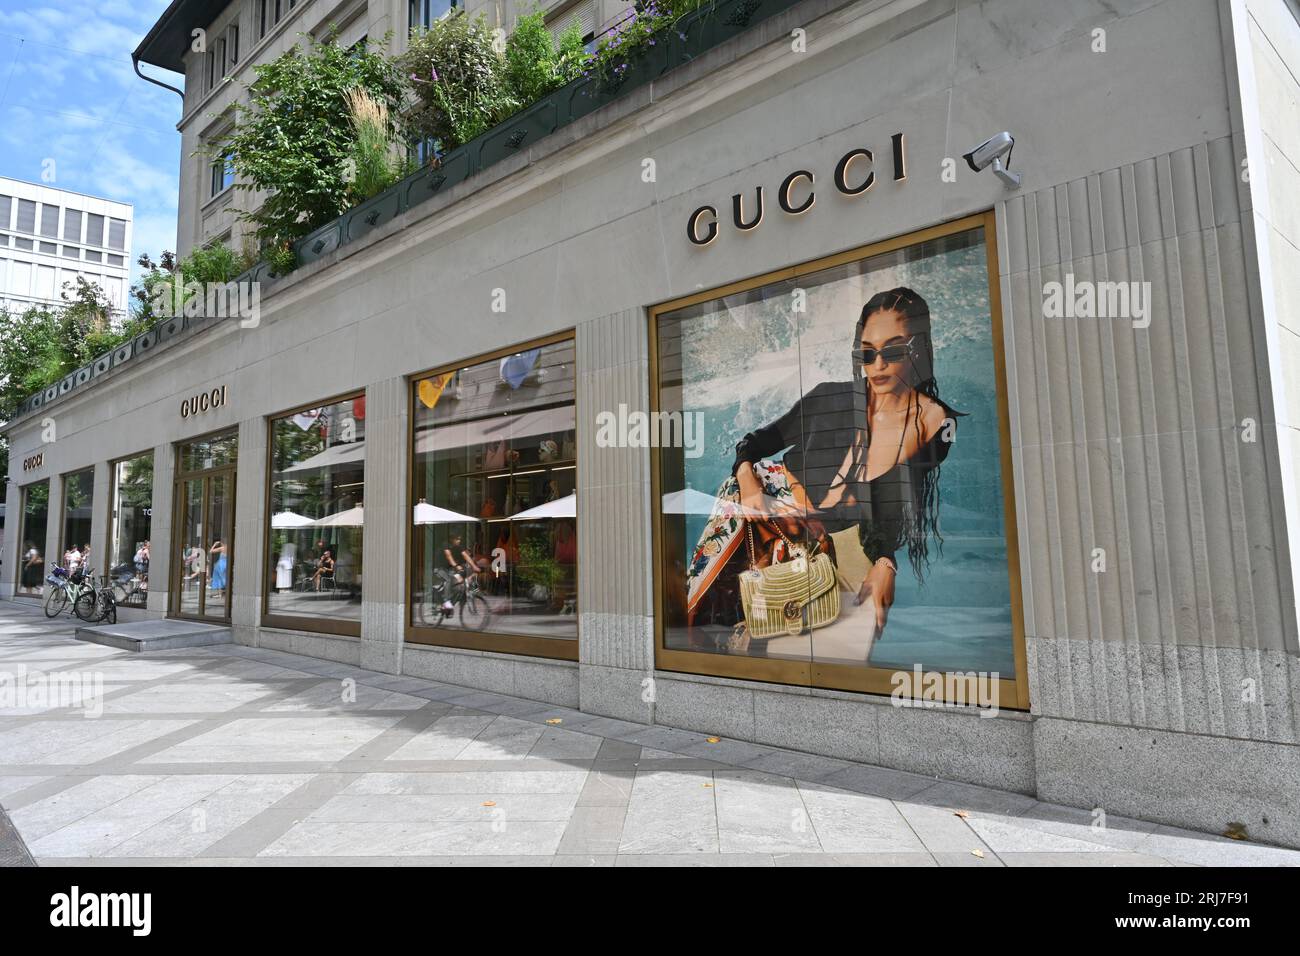 Show window of boutique Gucci with Italian luxury goods. Stock Photo